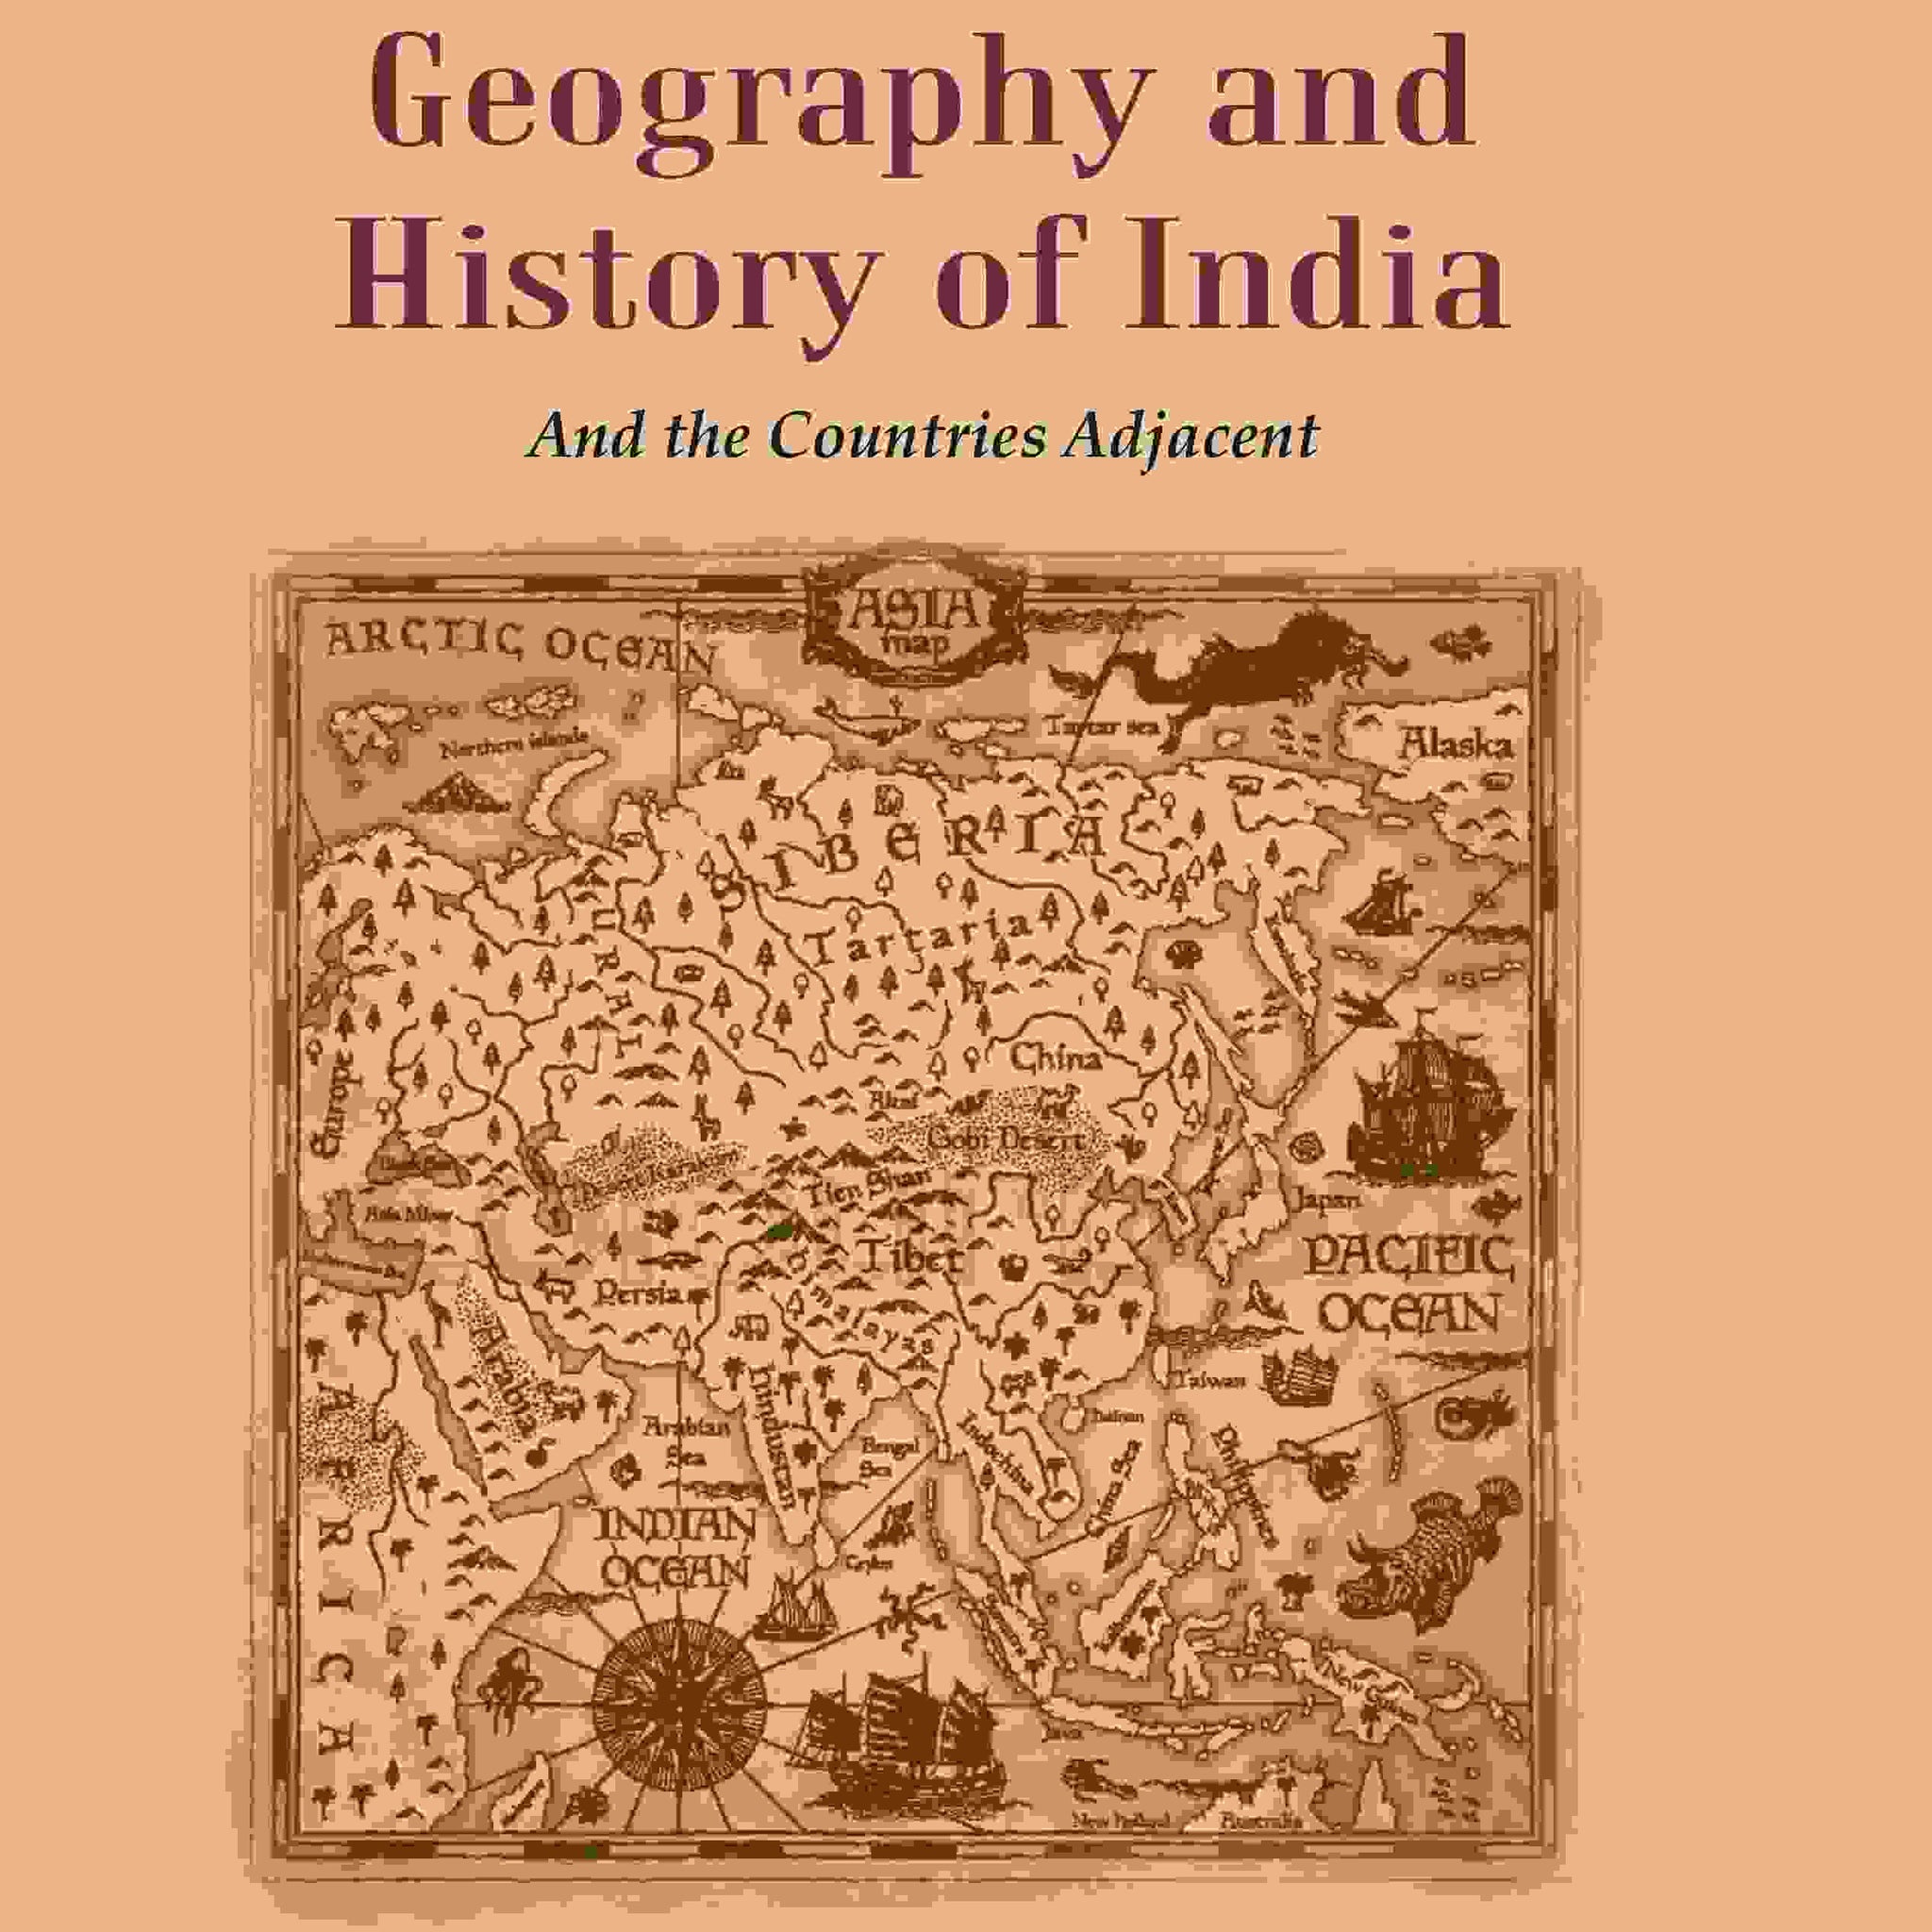 An Introduction to the Geography and History of India: And the Countries Adjacent